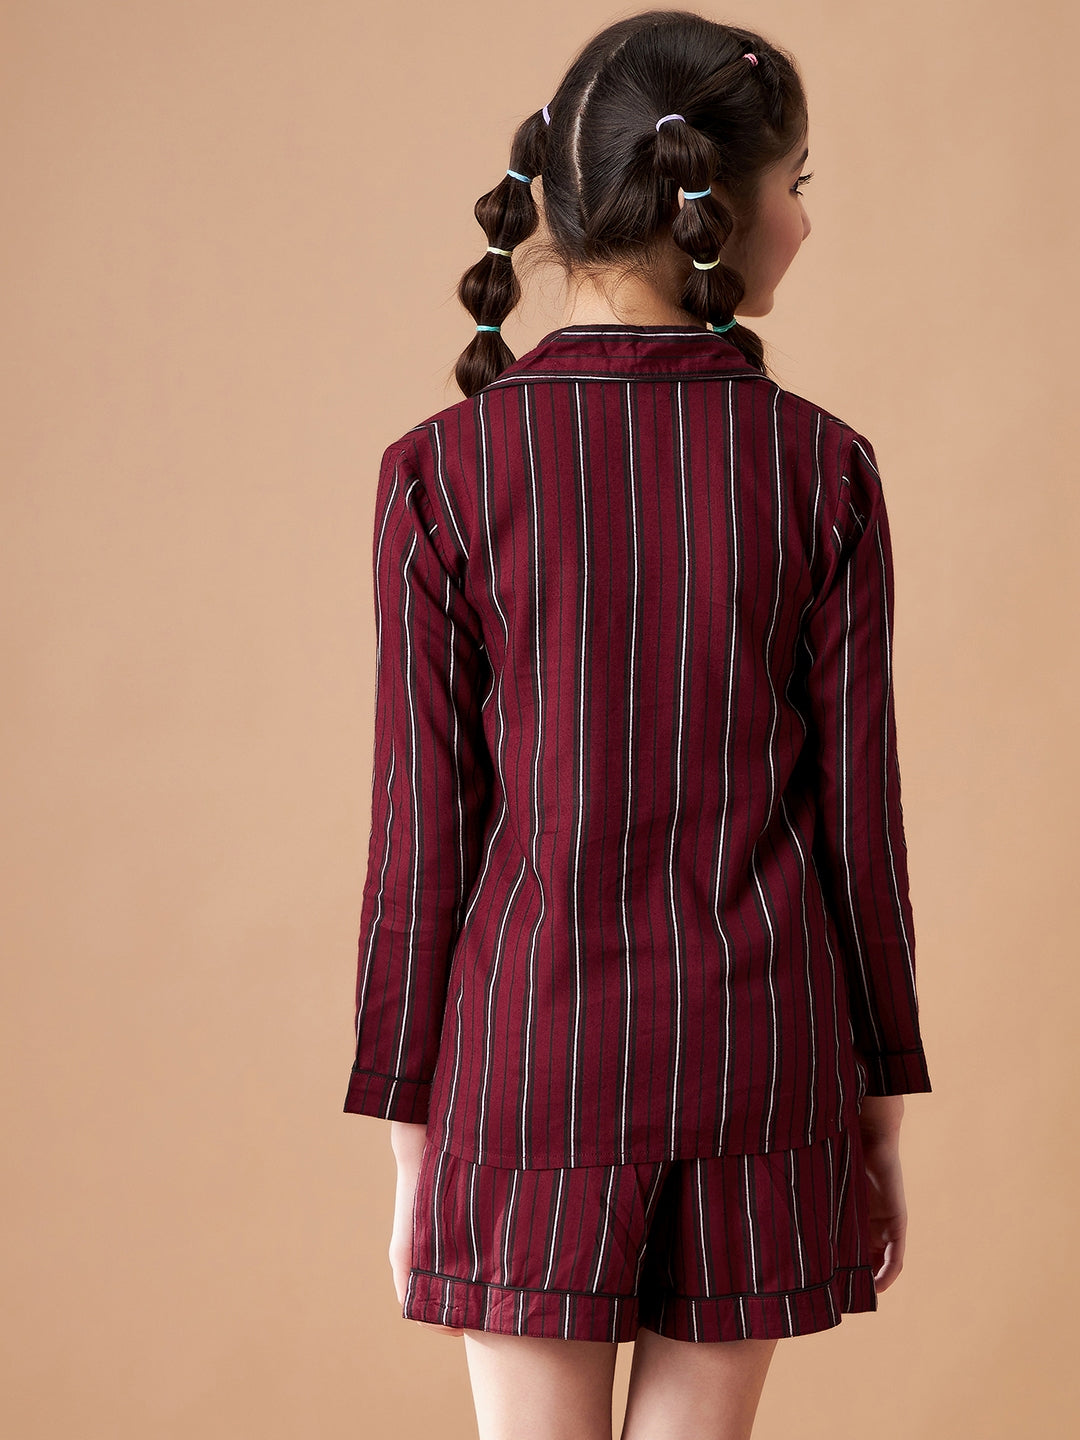 Girls Maroon Striped Shorts Night Suit Sets